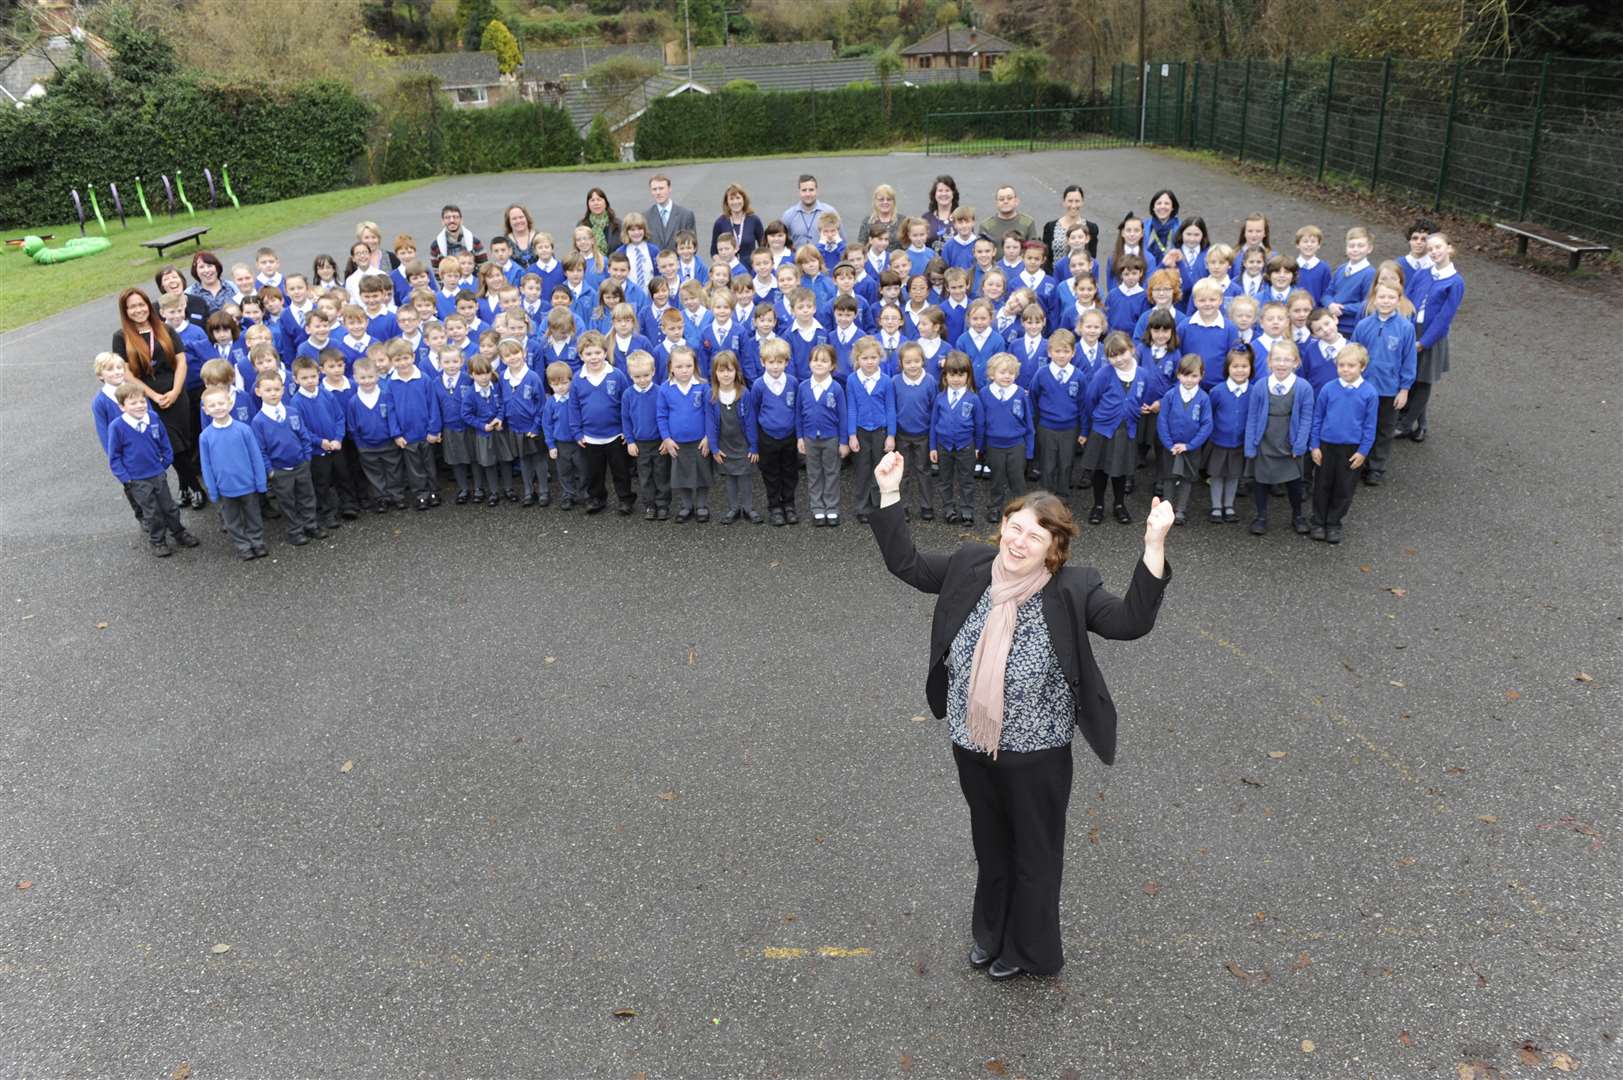 Temple Ewell C of E Primary School achieves its level best